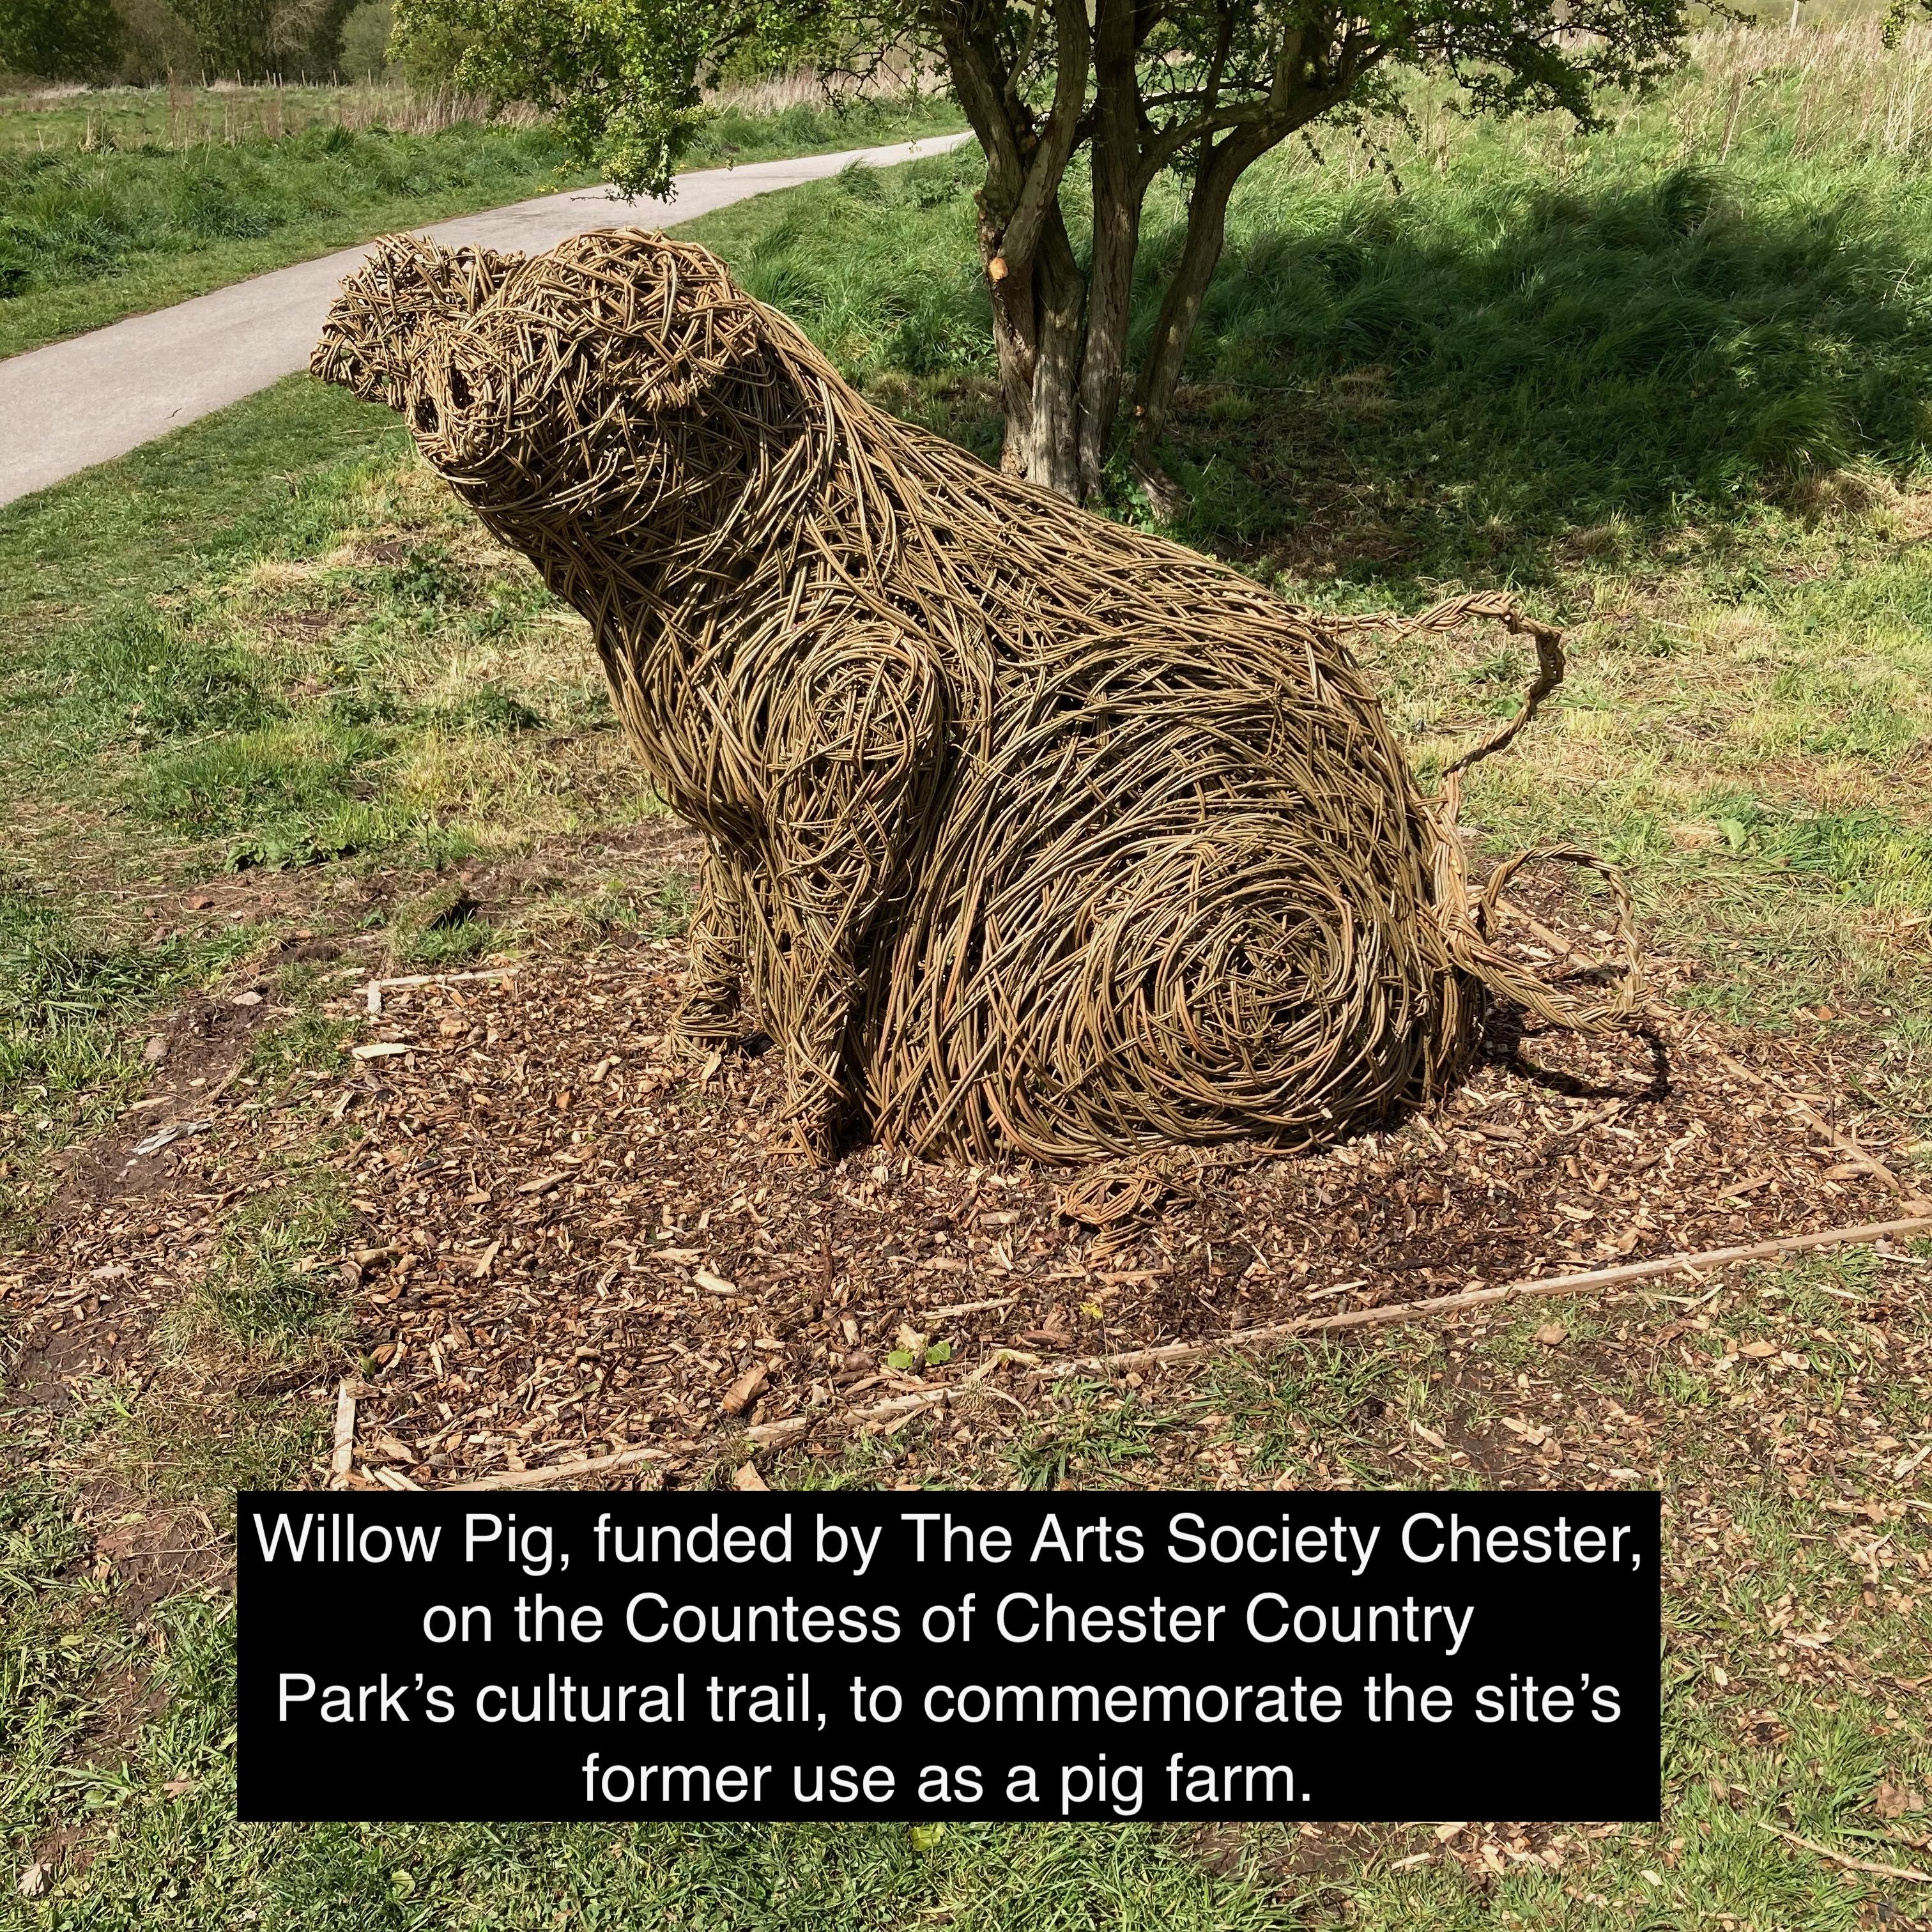 Willow Pig, funded by The Arts Society Chester in Countess of Chester Country Park